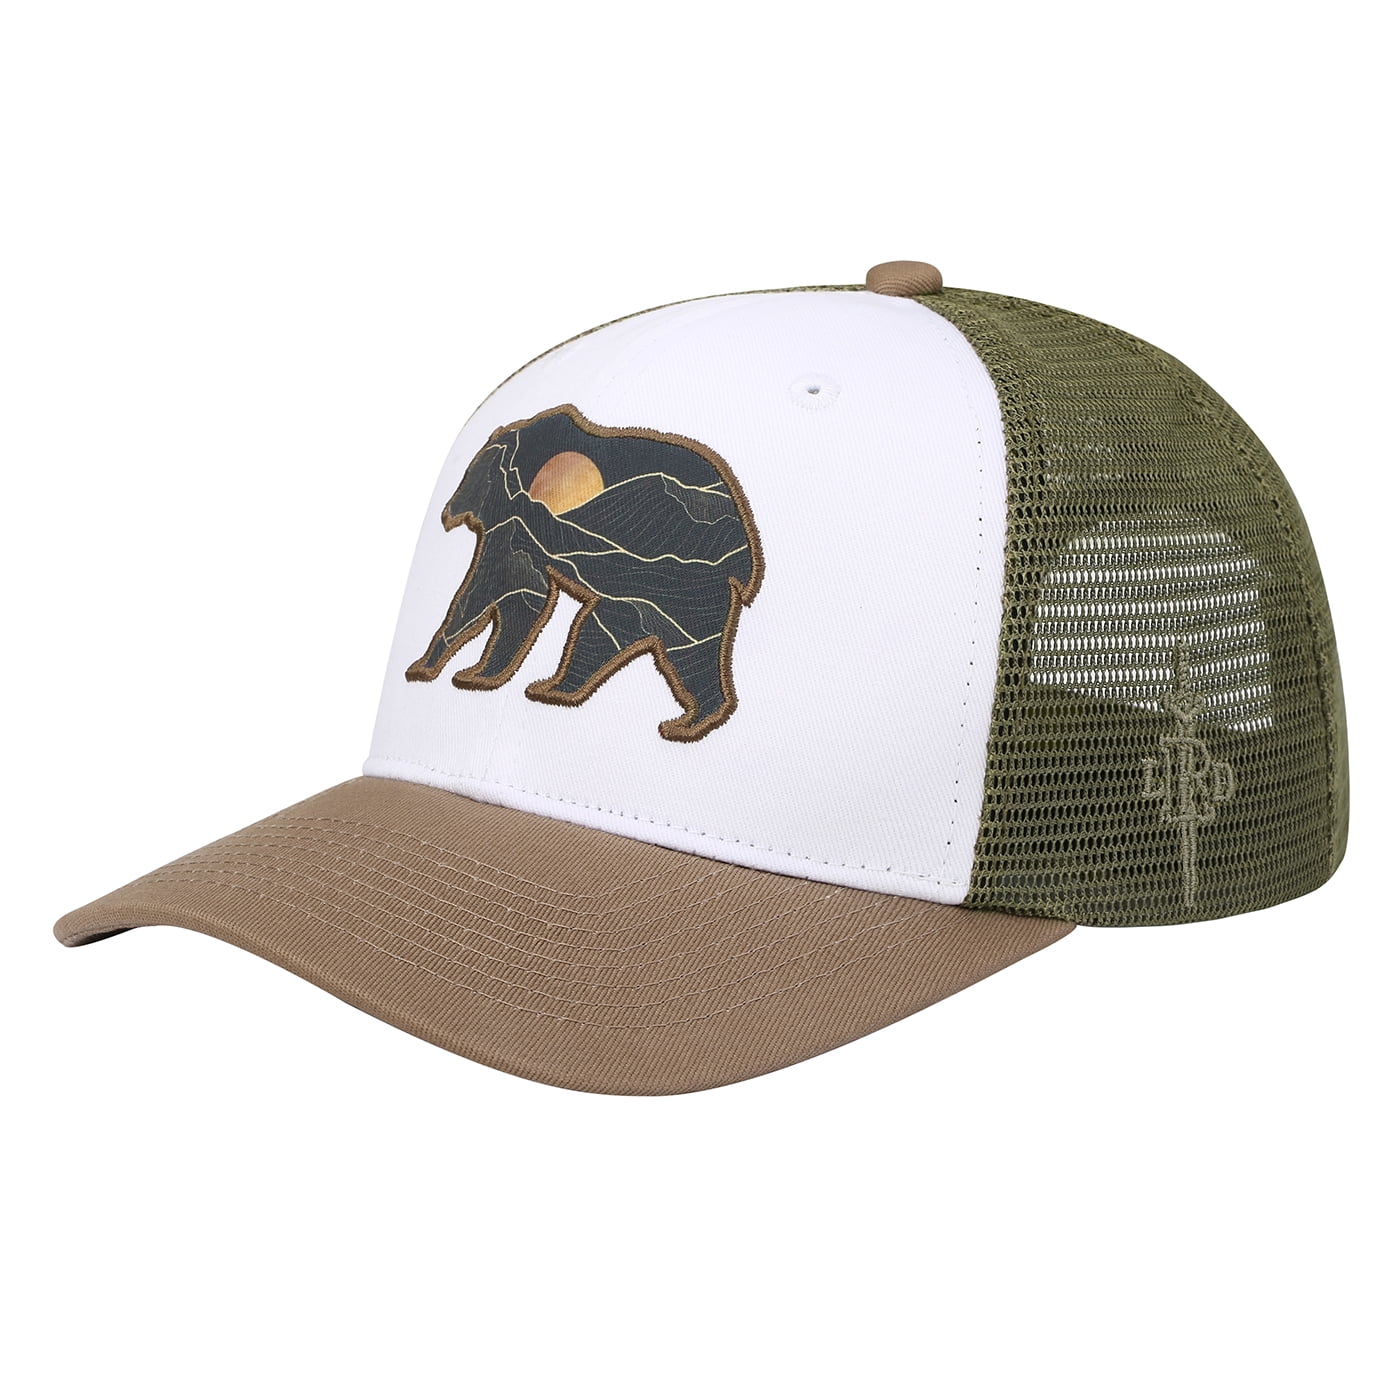 Performance Hunting Trucker Hats, Ball Caps & More